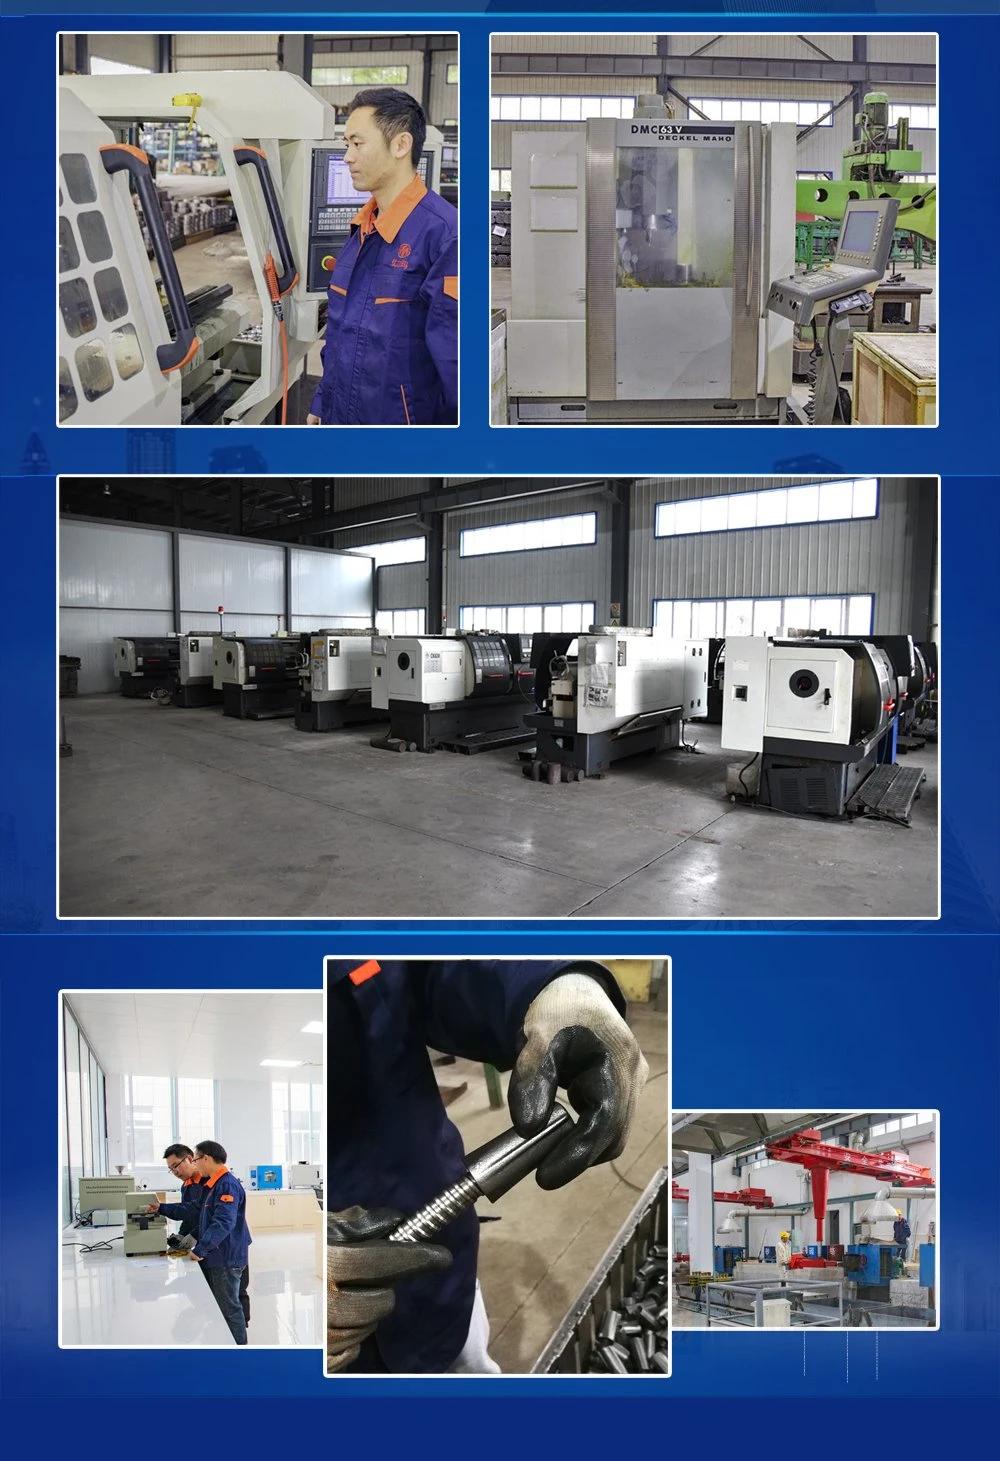 Component, Casting, Forging, Pressing, Mechanical, Machining, Power Fitting, Nuts